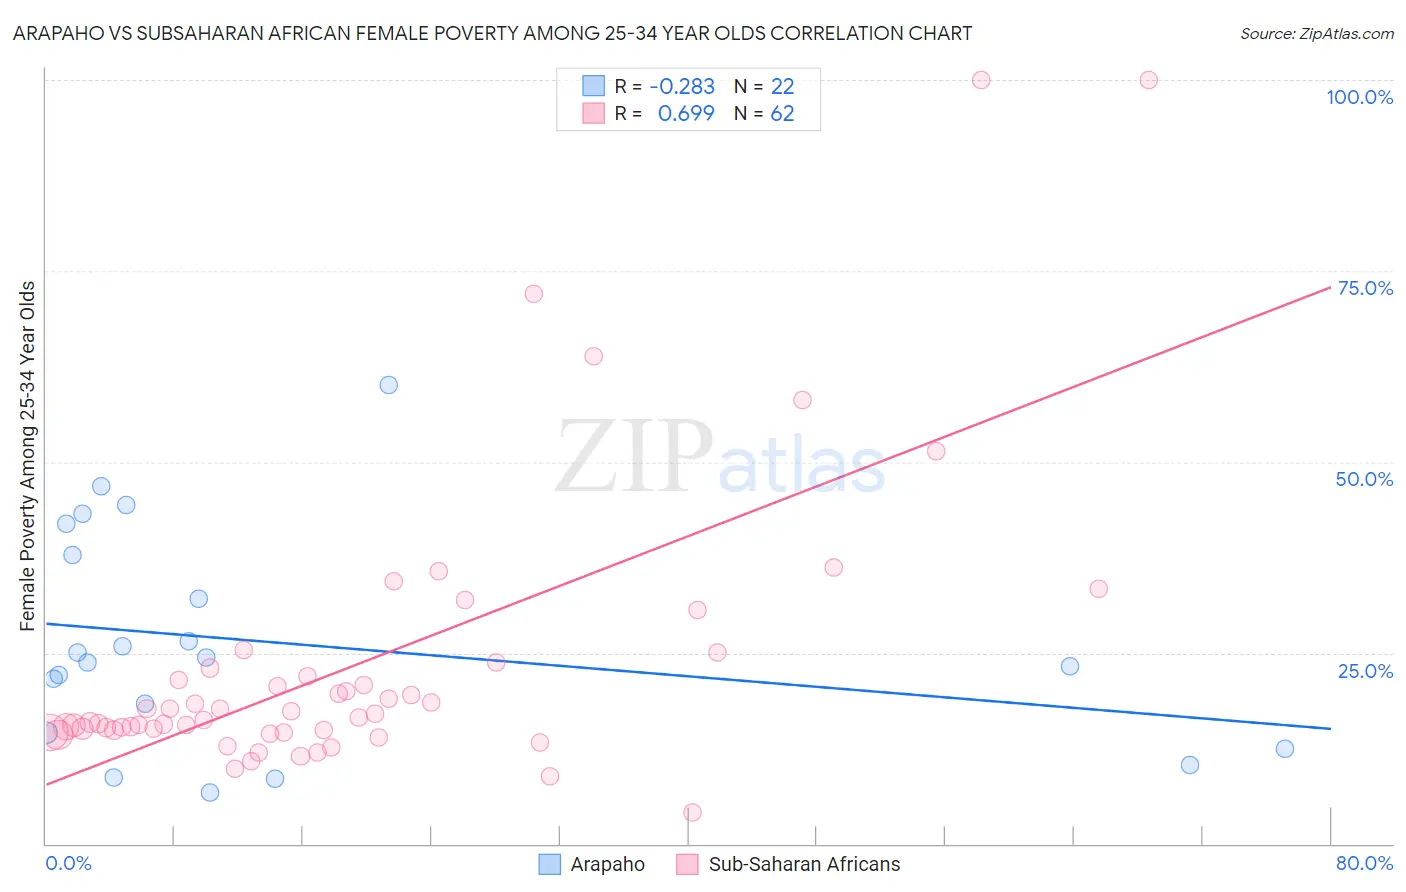 Arapaho vs Subsaharan African Female Poverty Among 25-34 Year Olds